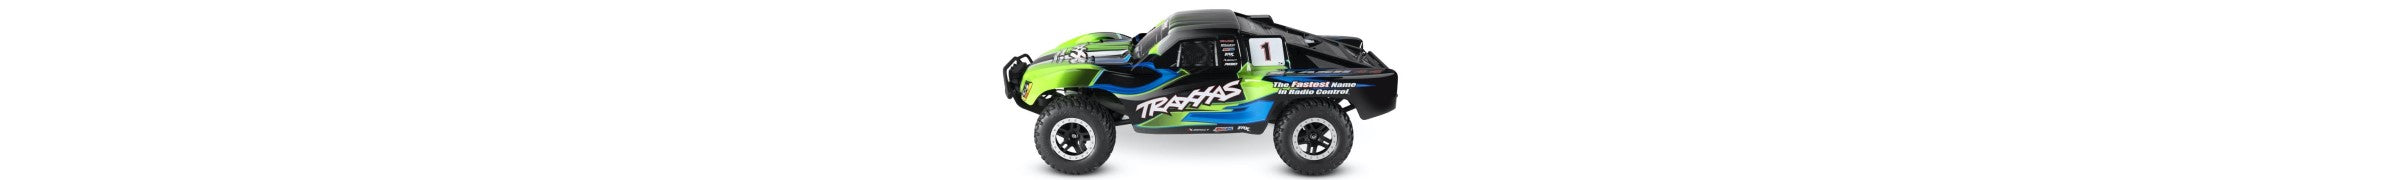 Parts For 68054-61 Traxxas Slash 4WD 1/10 XL-5 Short Course Truck with LED Lighting